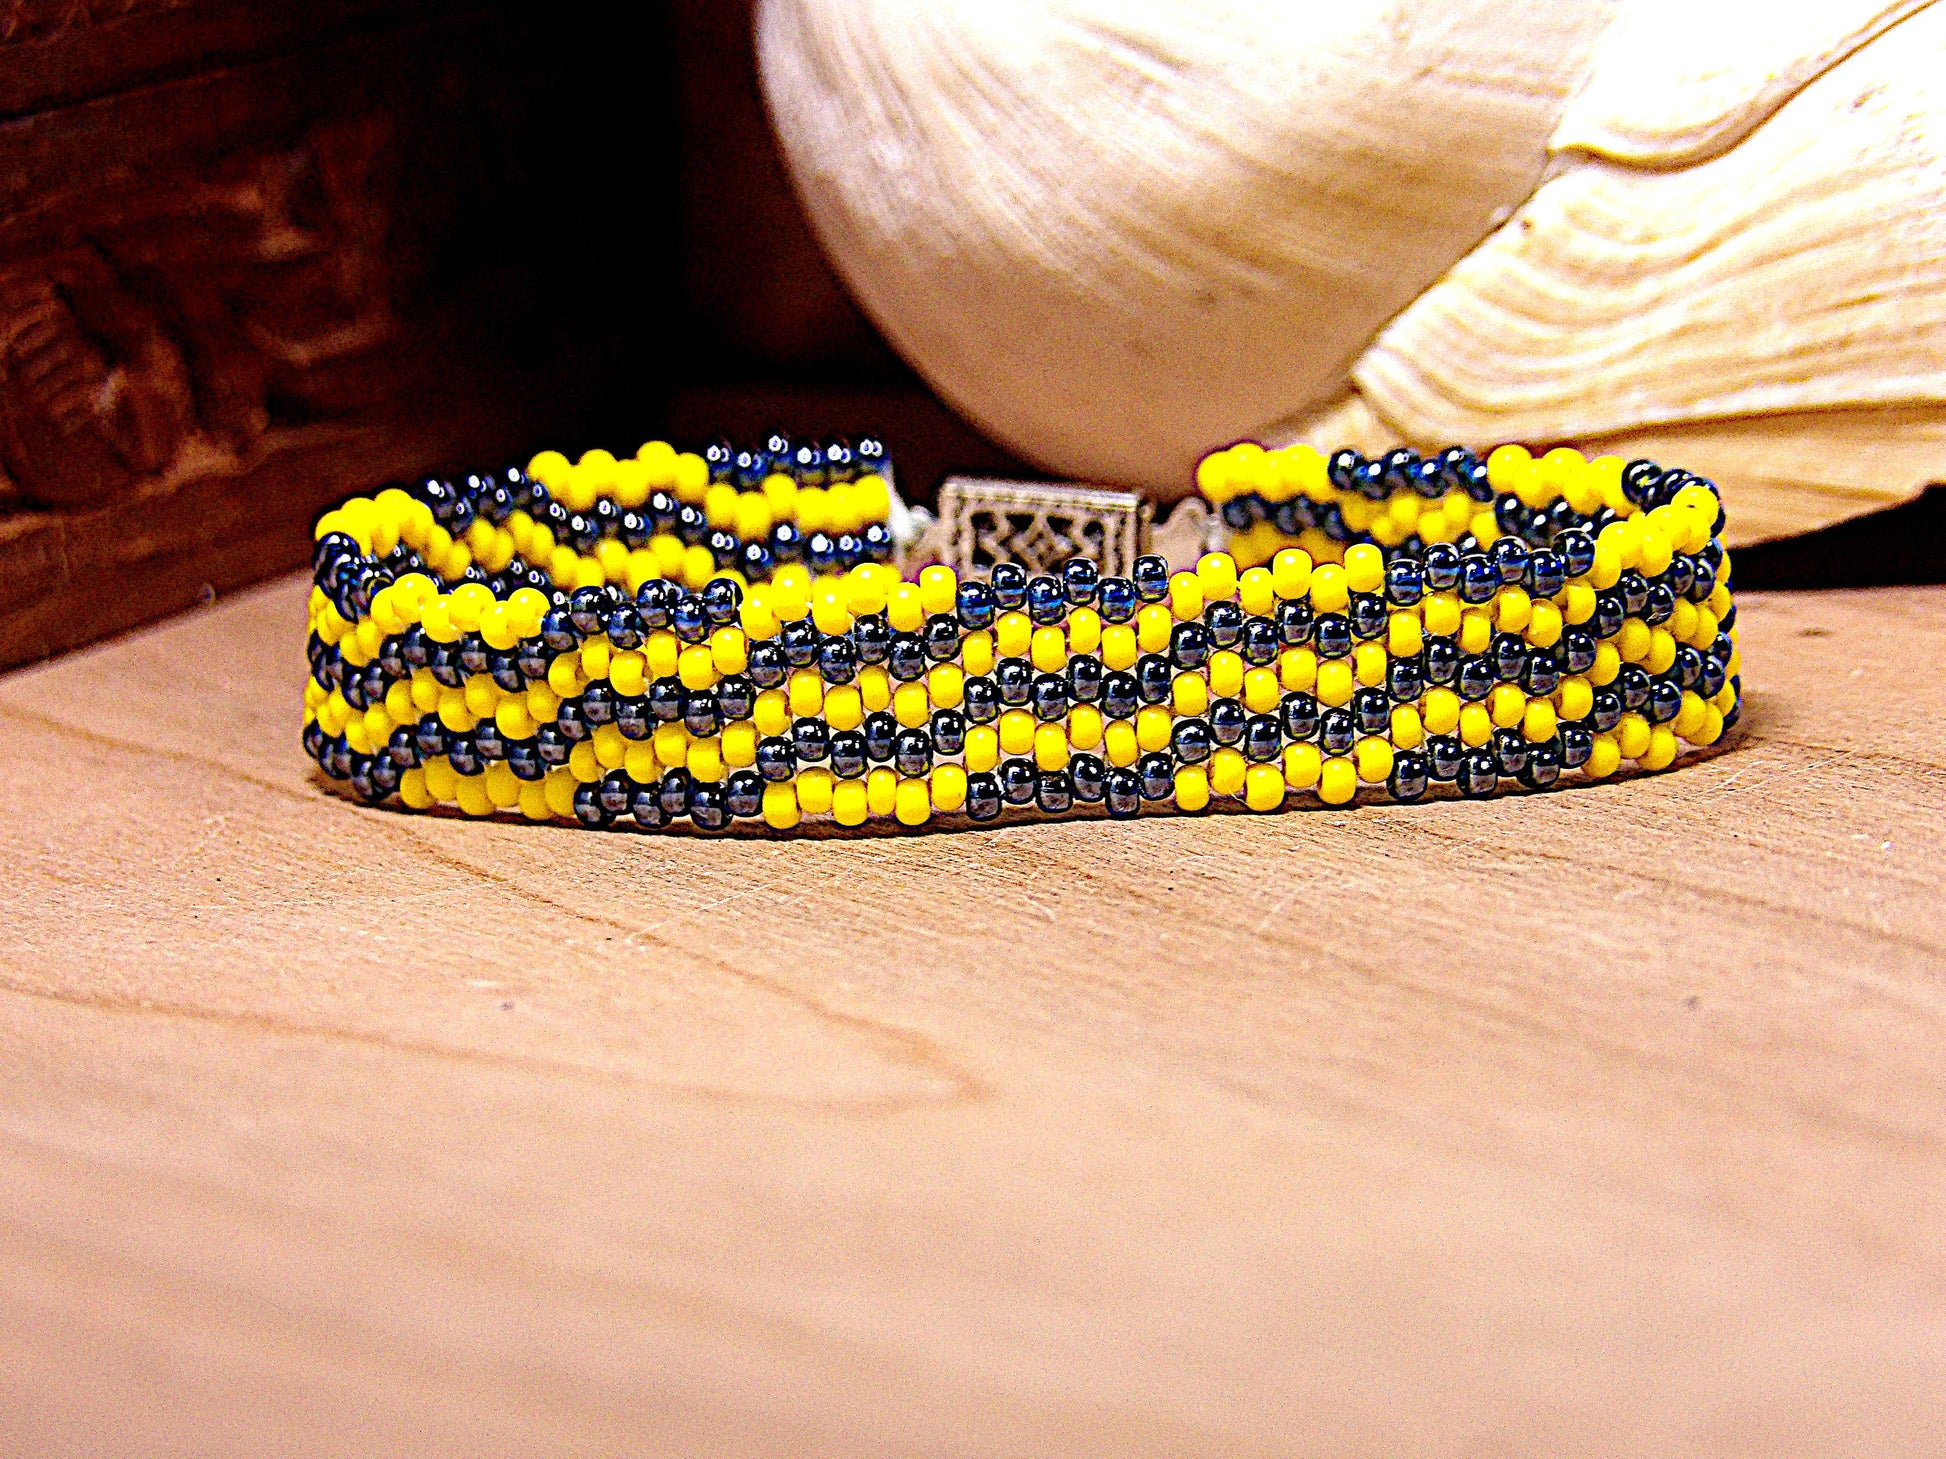 Luster Blue & Yellow Seed Bead Wave Cuff Bracelet w/Filigree Clasp | Bright Woven Boho Jewelry | Handmade USA Boutique One Of A Kind Gift